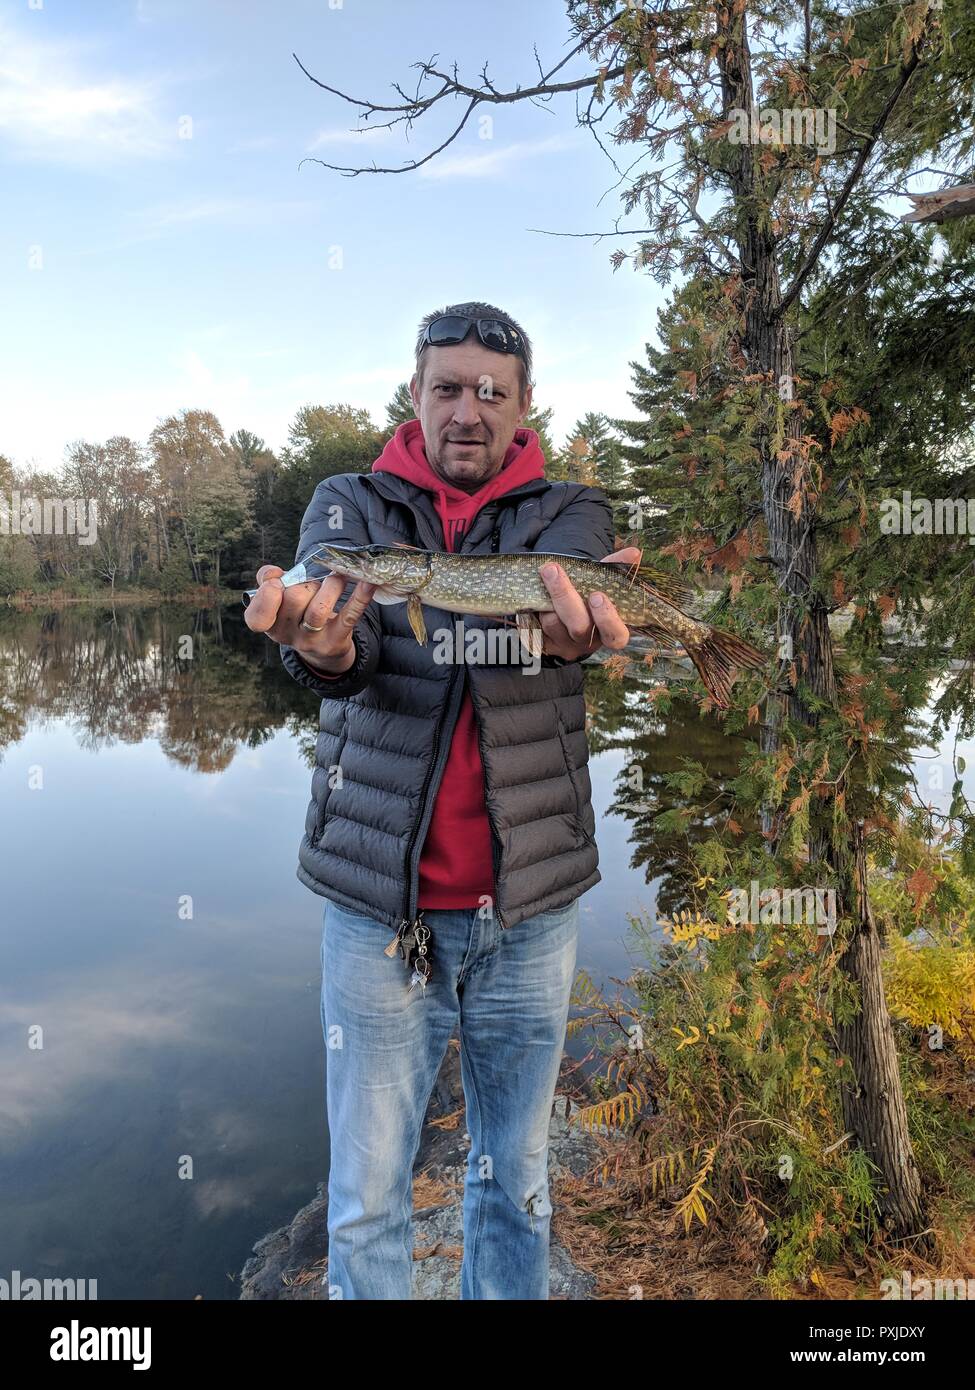 A  Man ,  Fish in the Hands, Real People, Lifestyle, Fishing, Outdoors Stock Photo